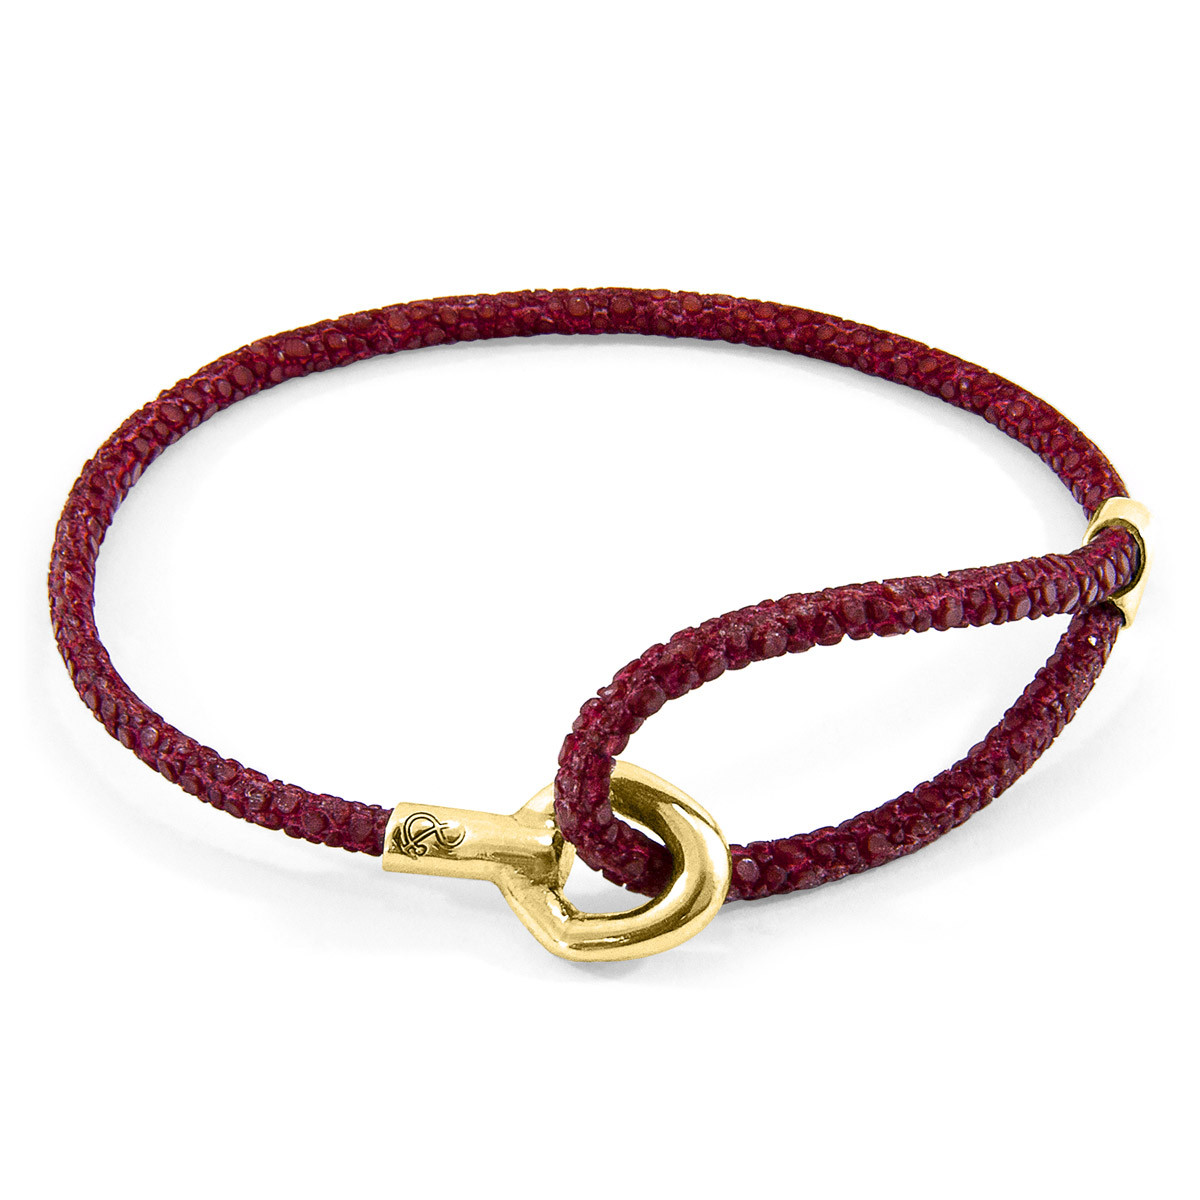 Bordeaux Red Blake 9ct Yellow Gold and Stingray Leather Bracelet